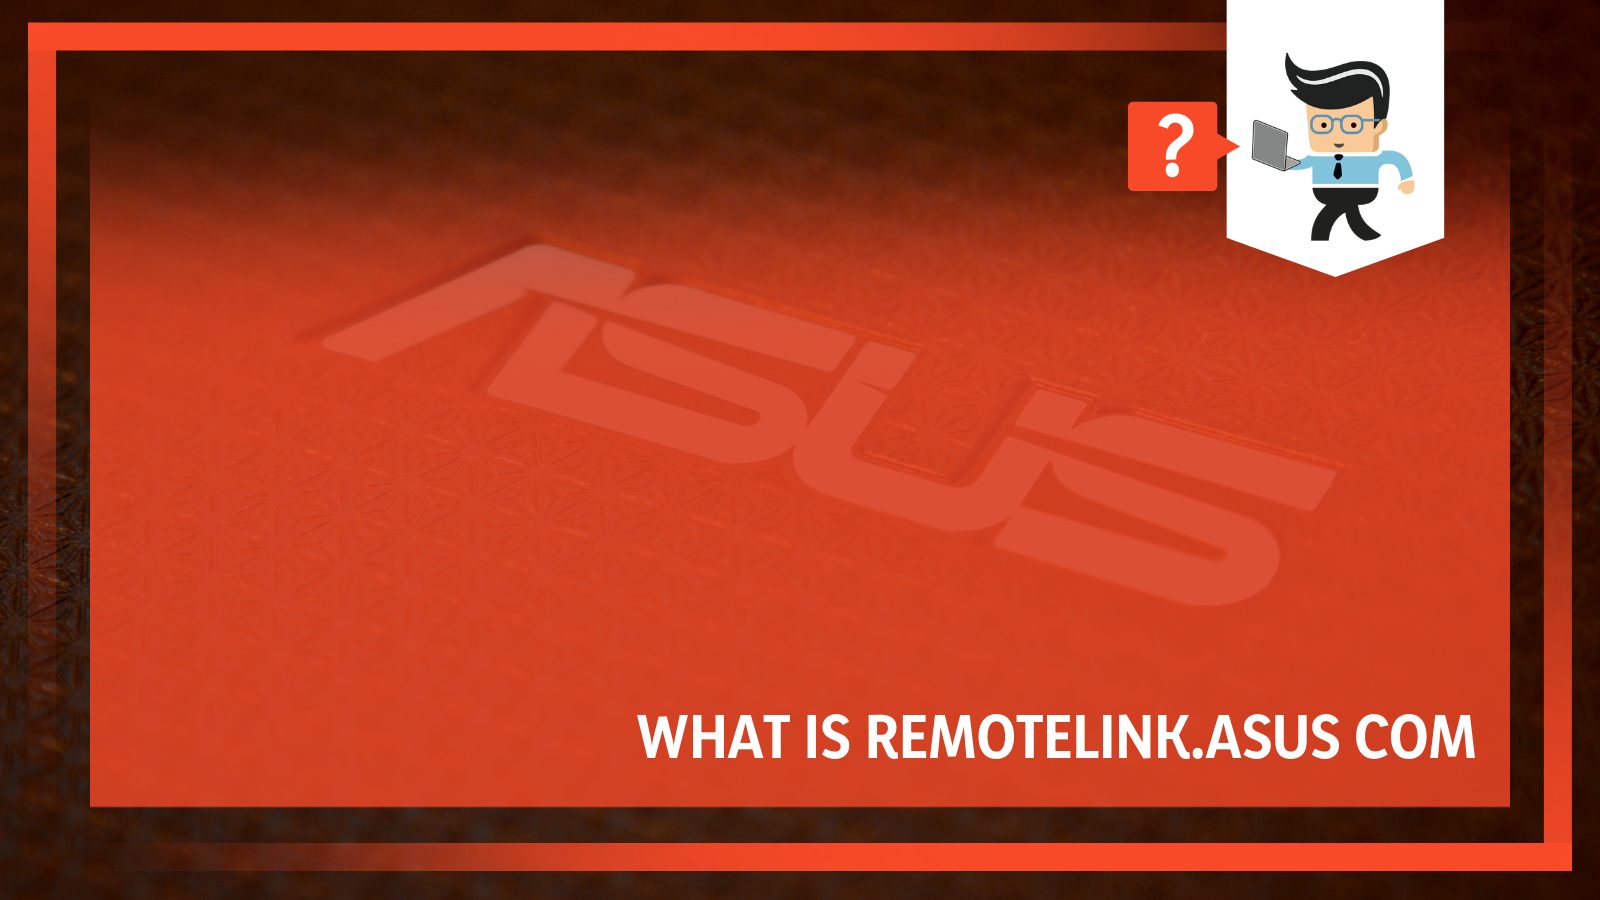 Hot to install remotelink asus